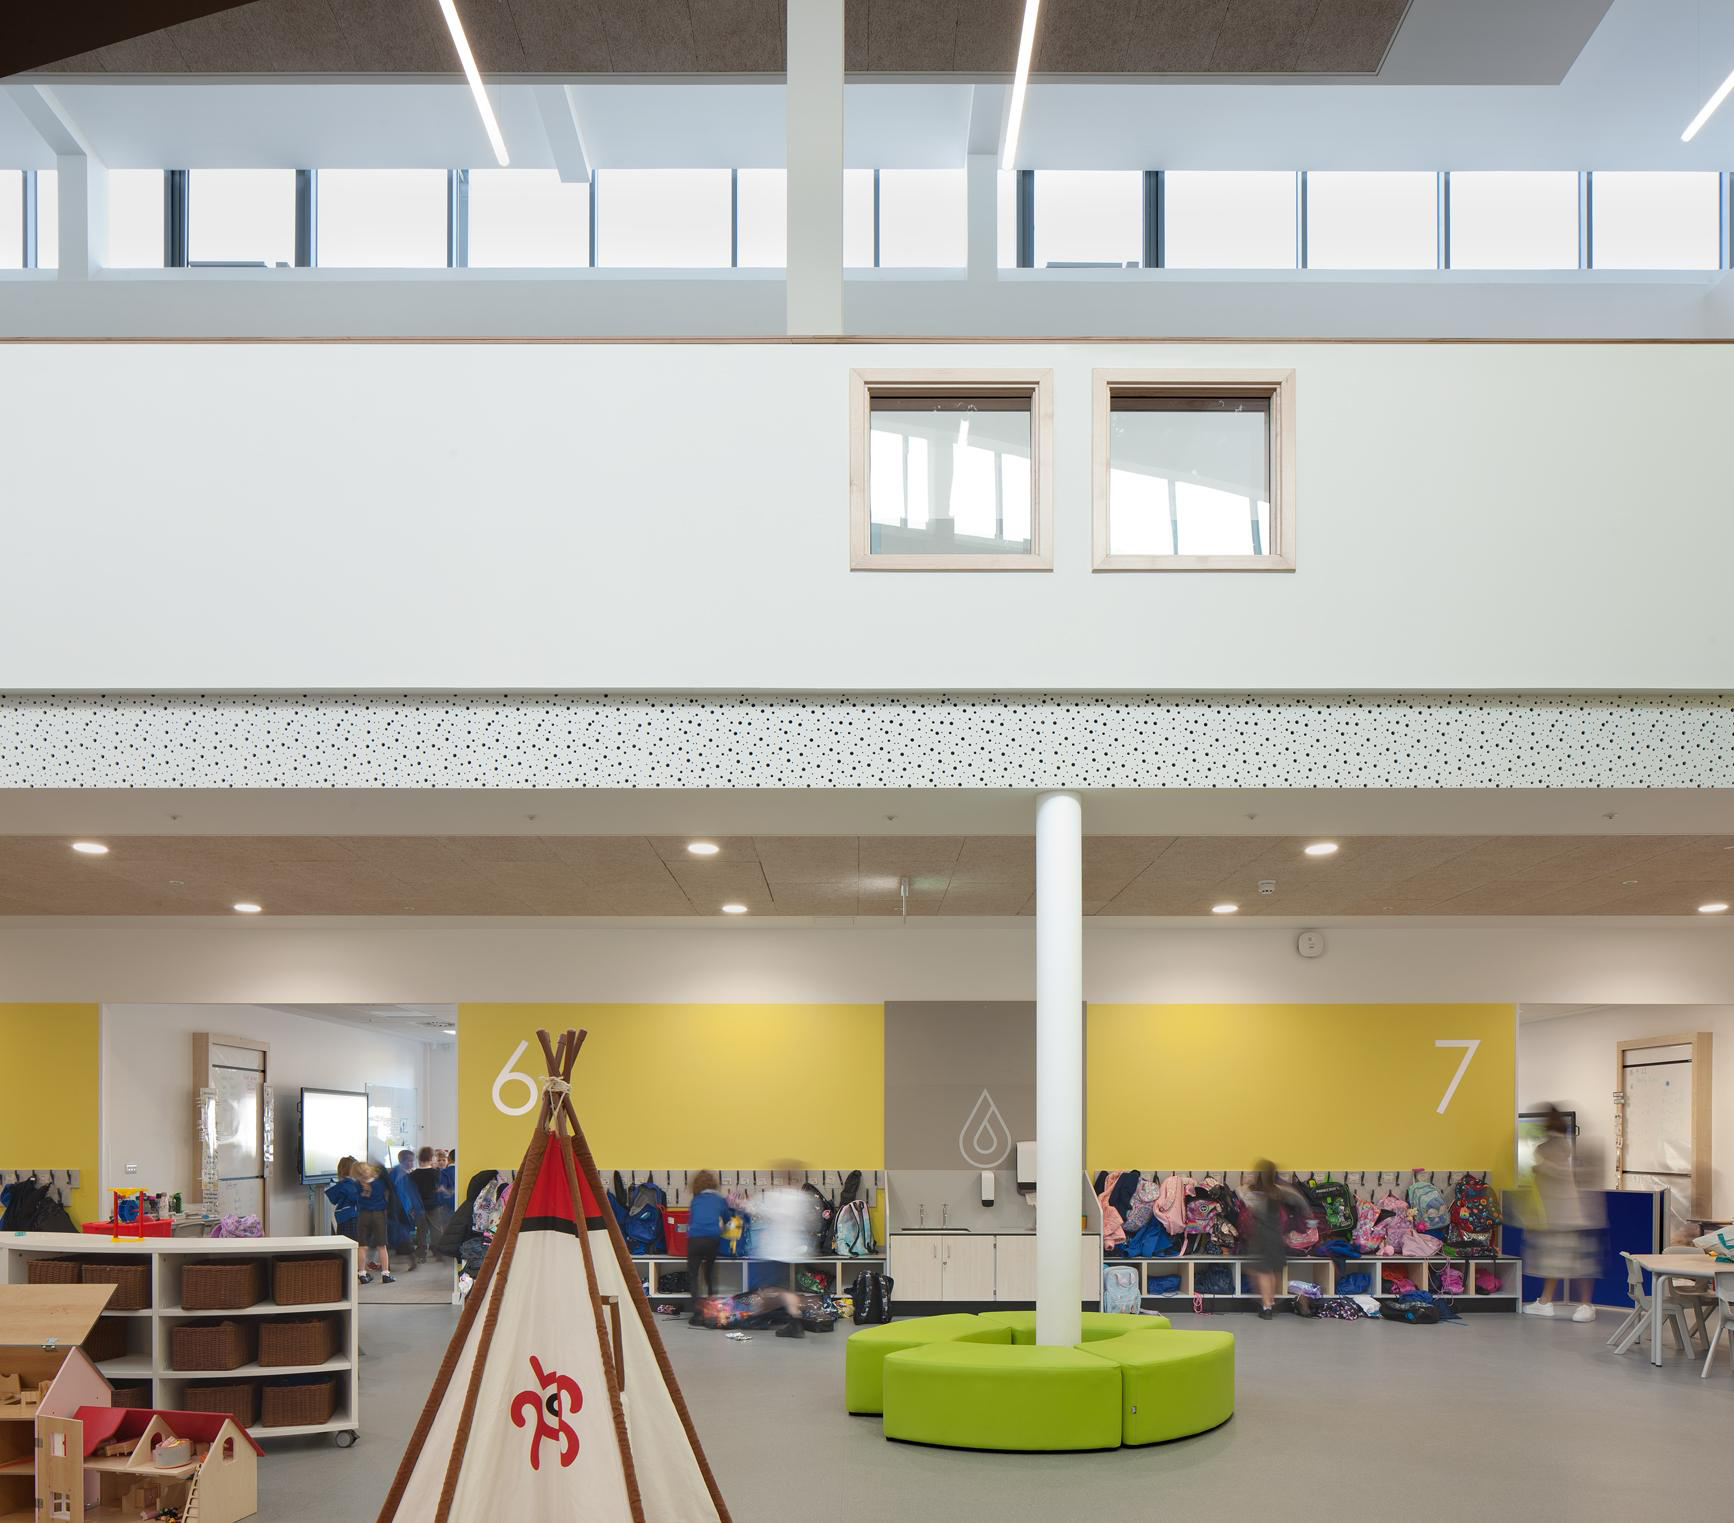 Deanestor fits out new £18m primary school campus in South Ayrshire